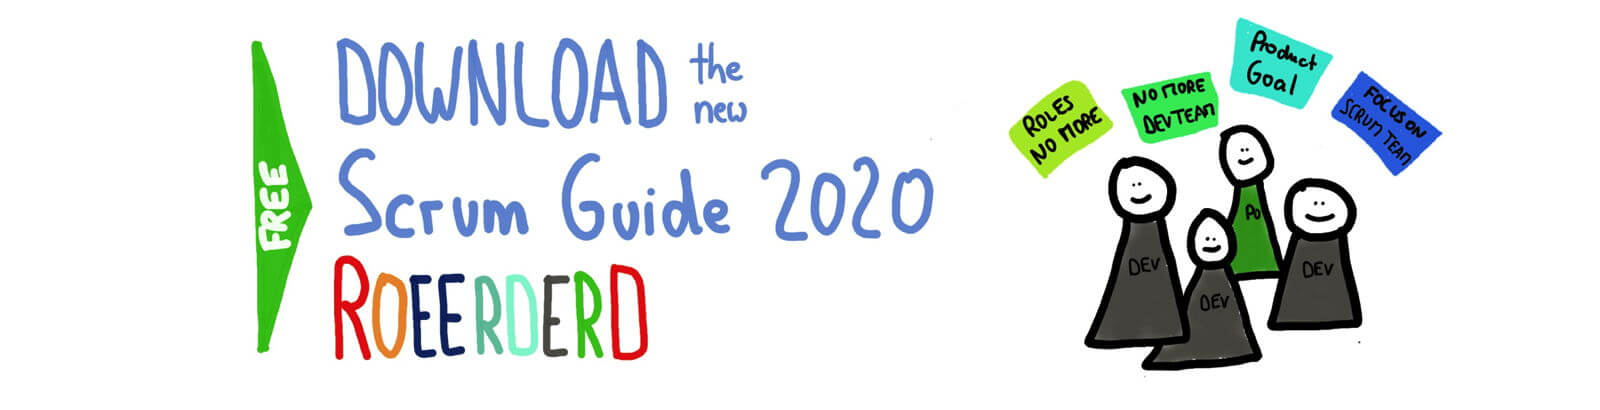 Scrum Guide 2020 - Download new version of Scrum Guide Reordered - Age-of-Product.com